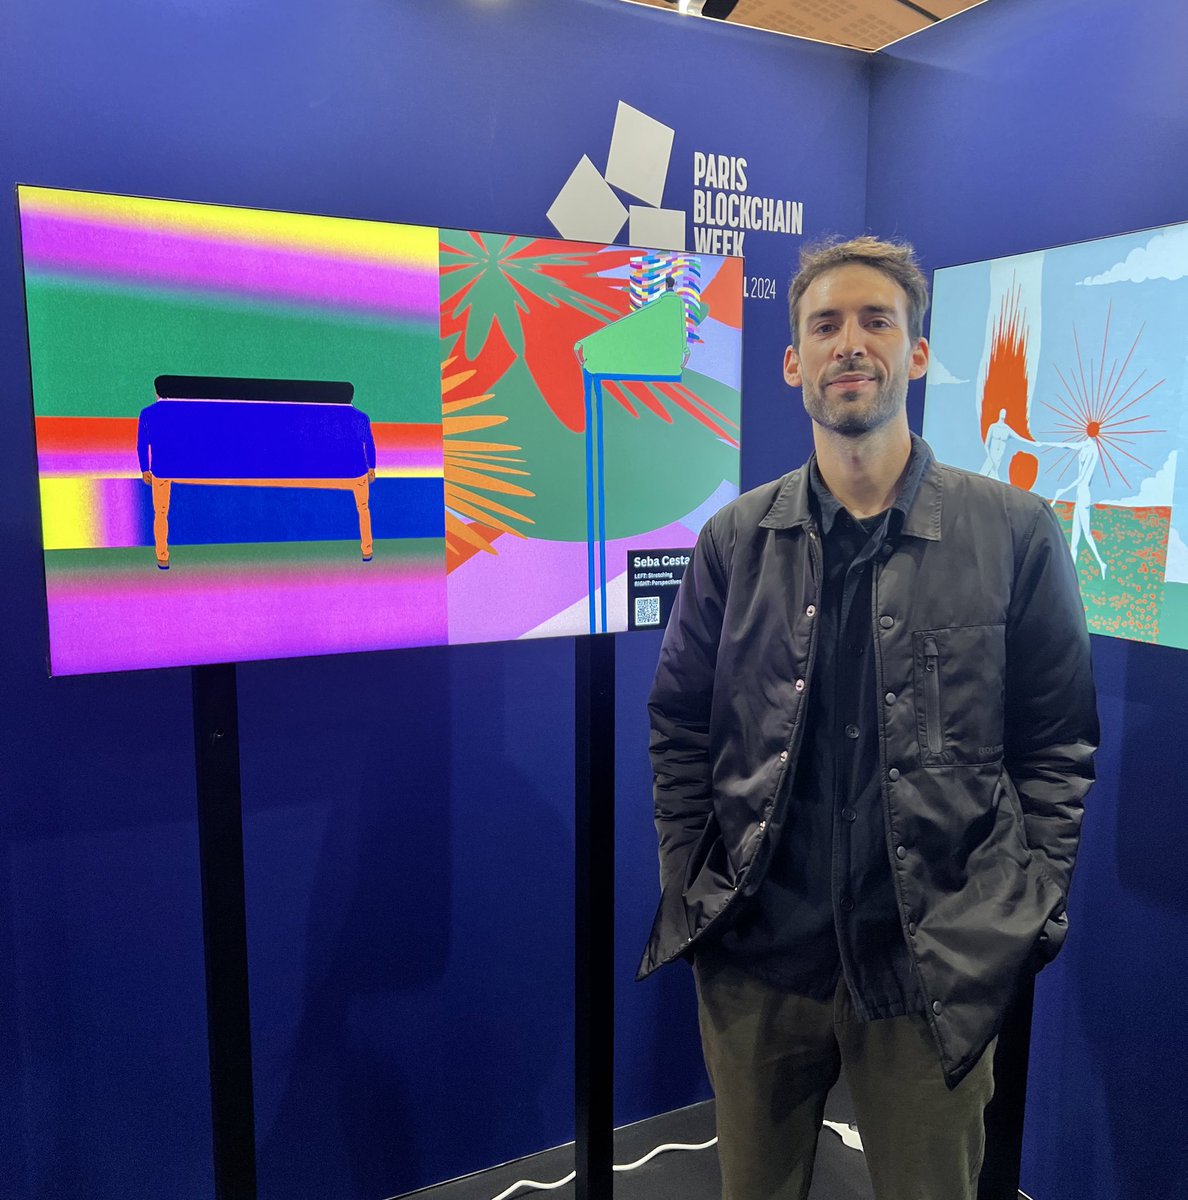 We are delighted to have met @sebacestaro who flew all the way from Argentina! Seb! You are so talented! We are so happy to have you exhibited! And thank you @ParisBlockWeek for giving us the space.